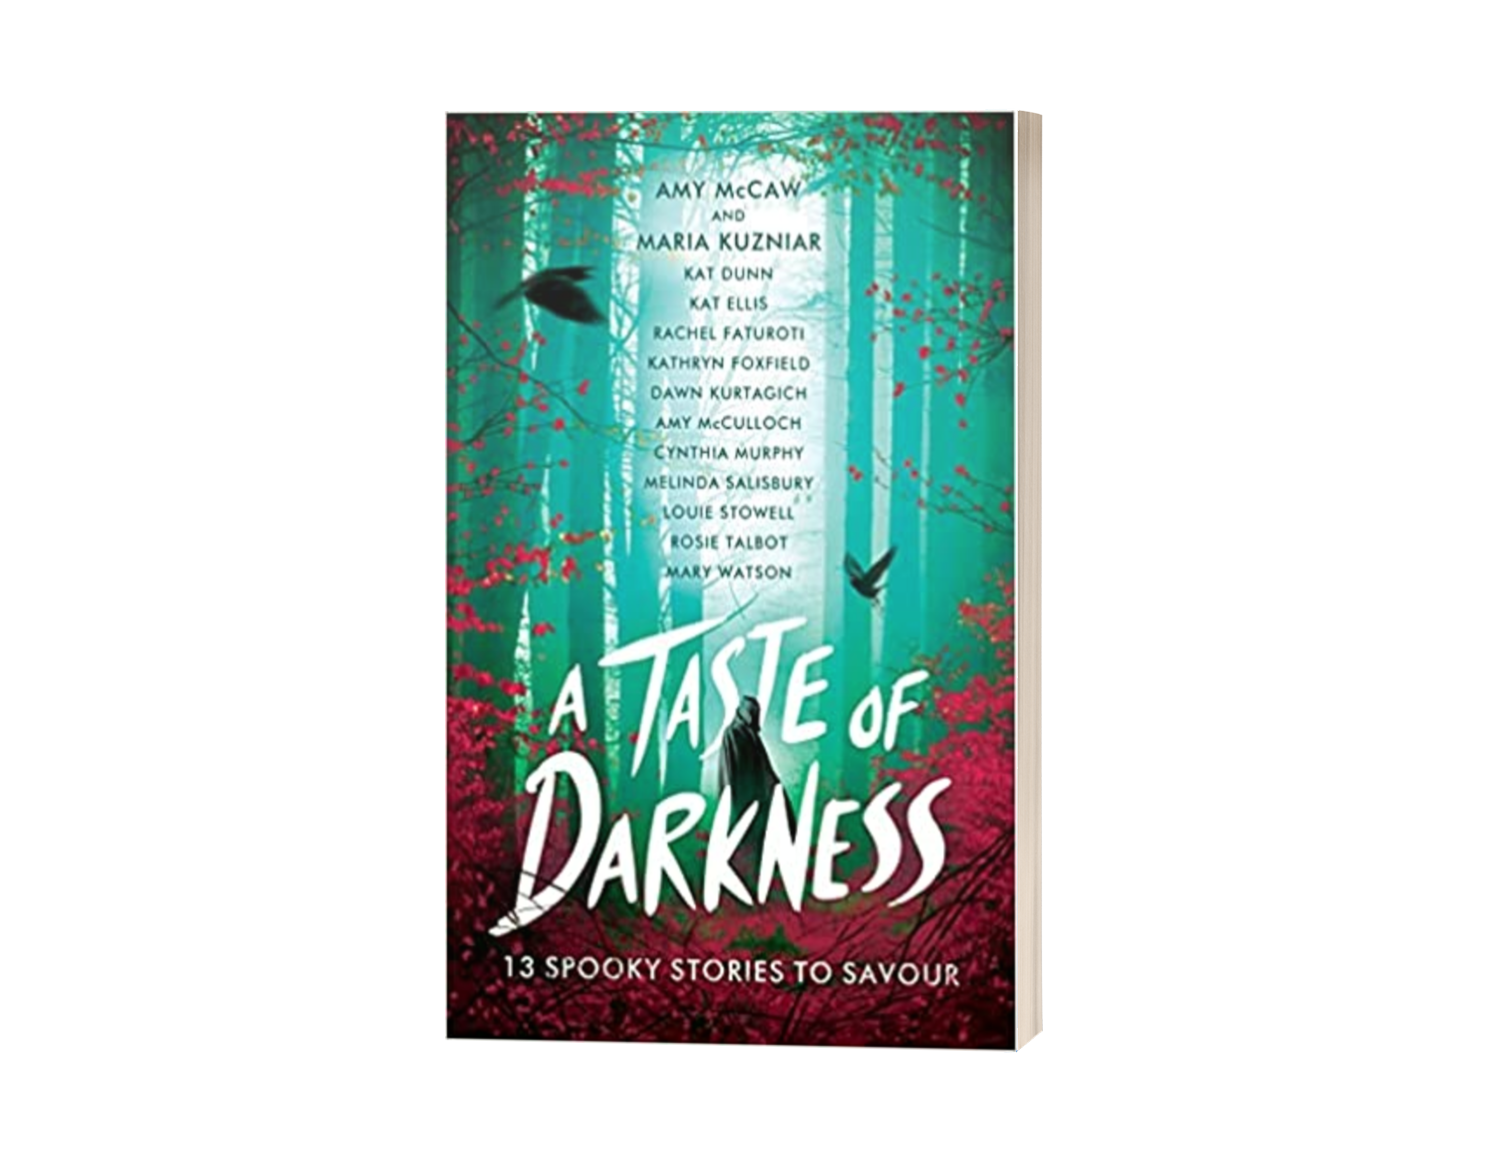 A taste of darkness is a book about spooky stories to savour.